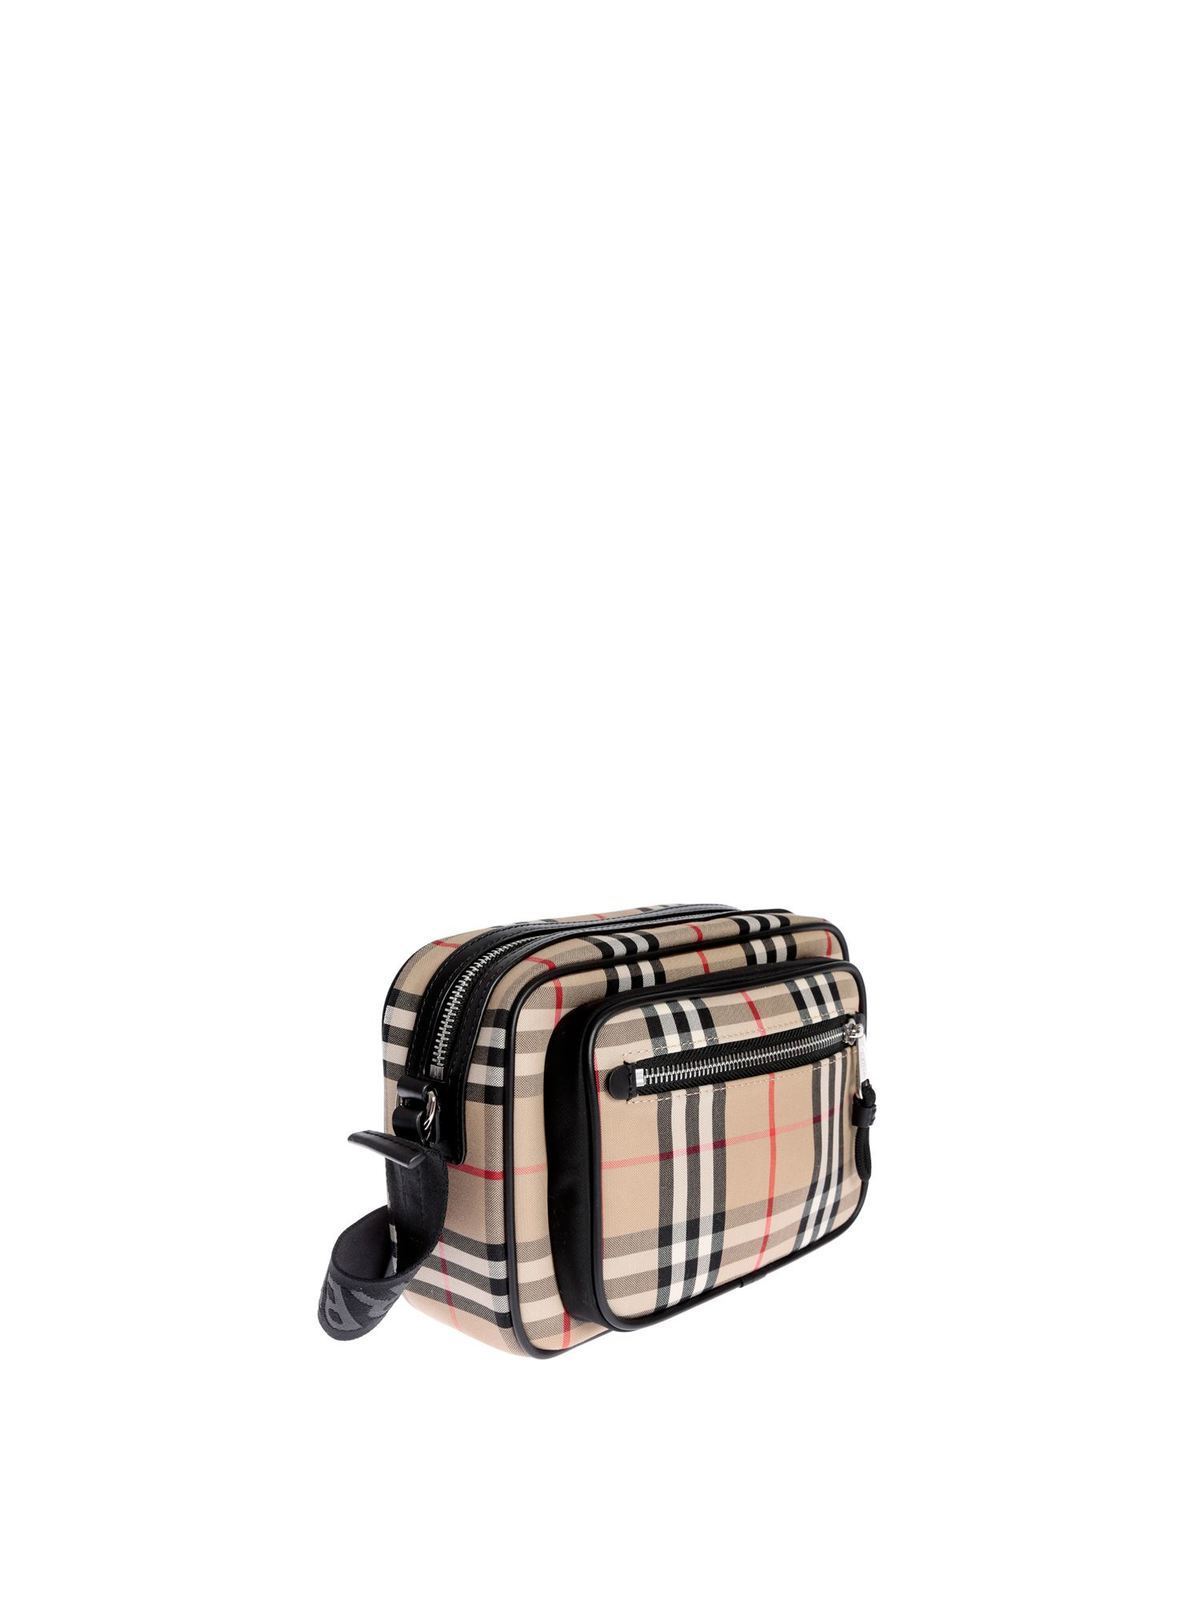 Cross body bags Burberry - Paddy bag - 8010152 | Shop online at iKRIX